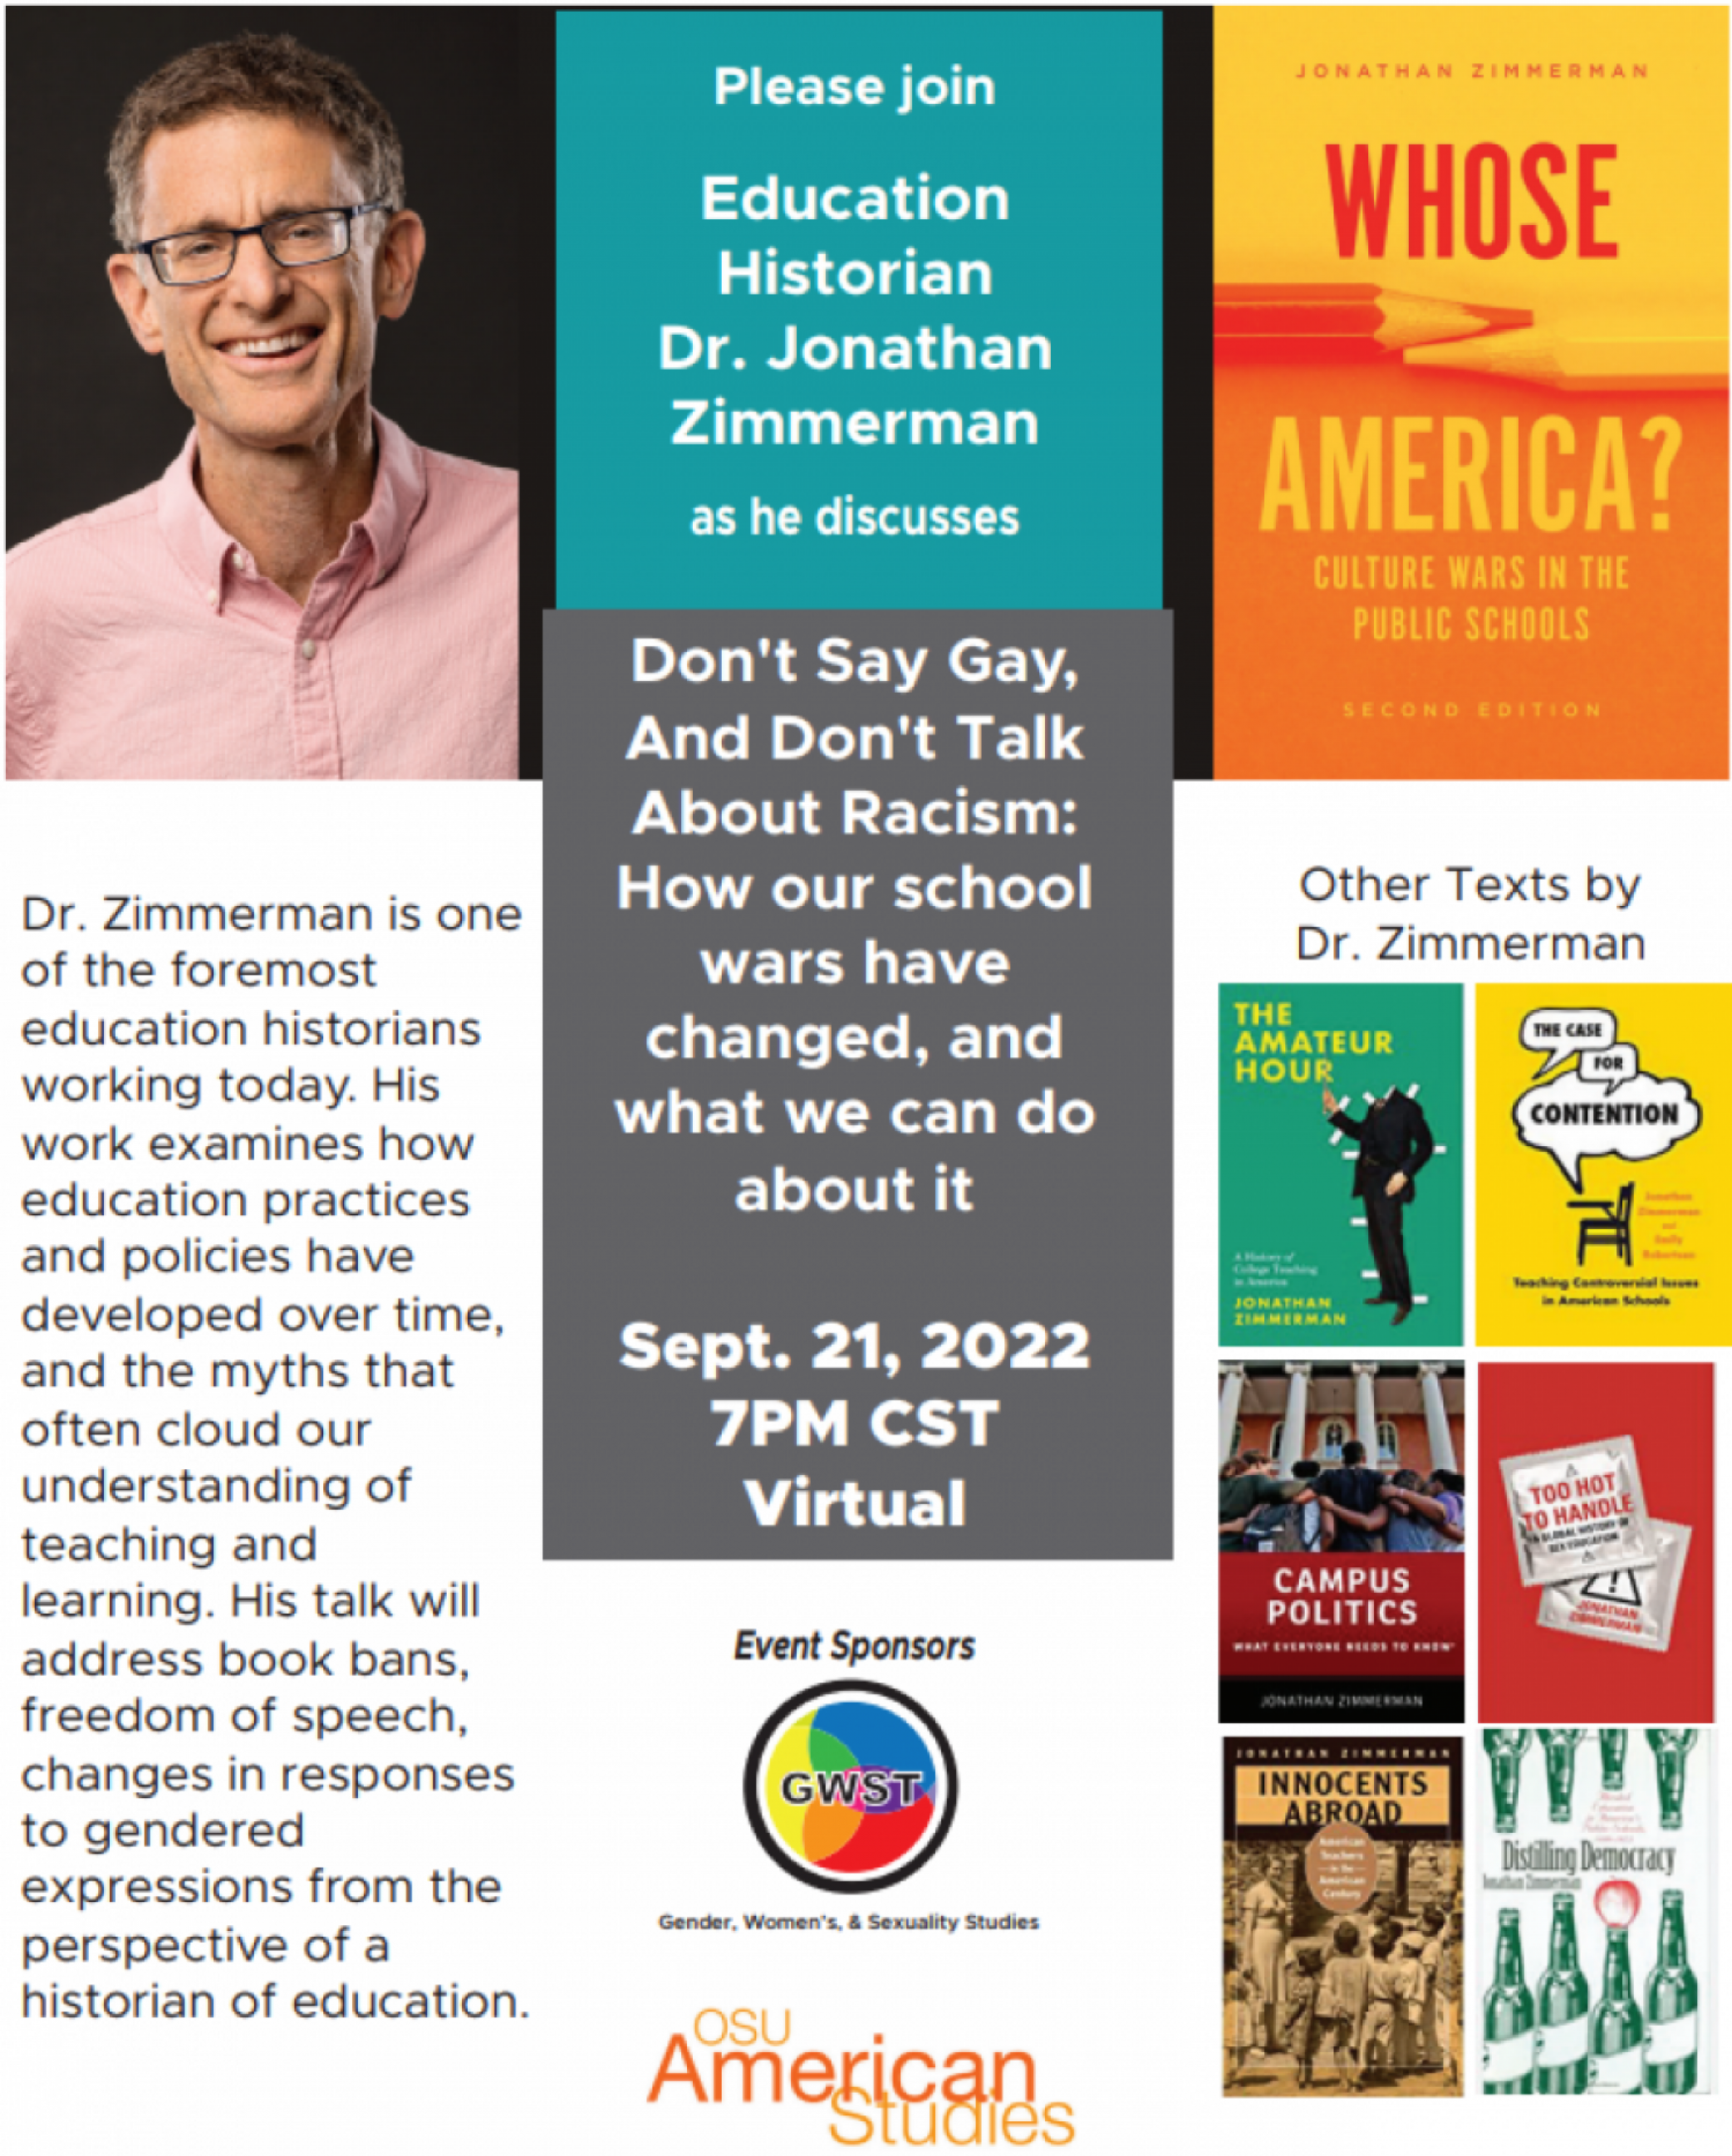 Dr. Jonathan Zimmerman: “Don’t Say Gay and Don’t Talk About Racism: How our School Wars have changed and What we can do About it.”